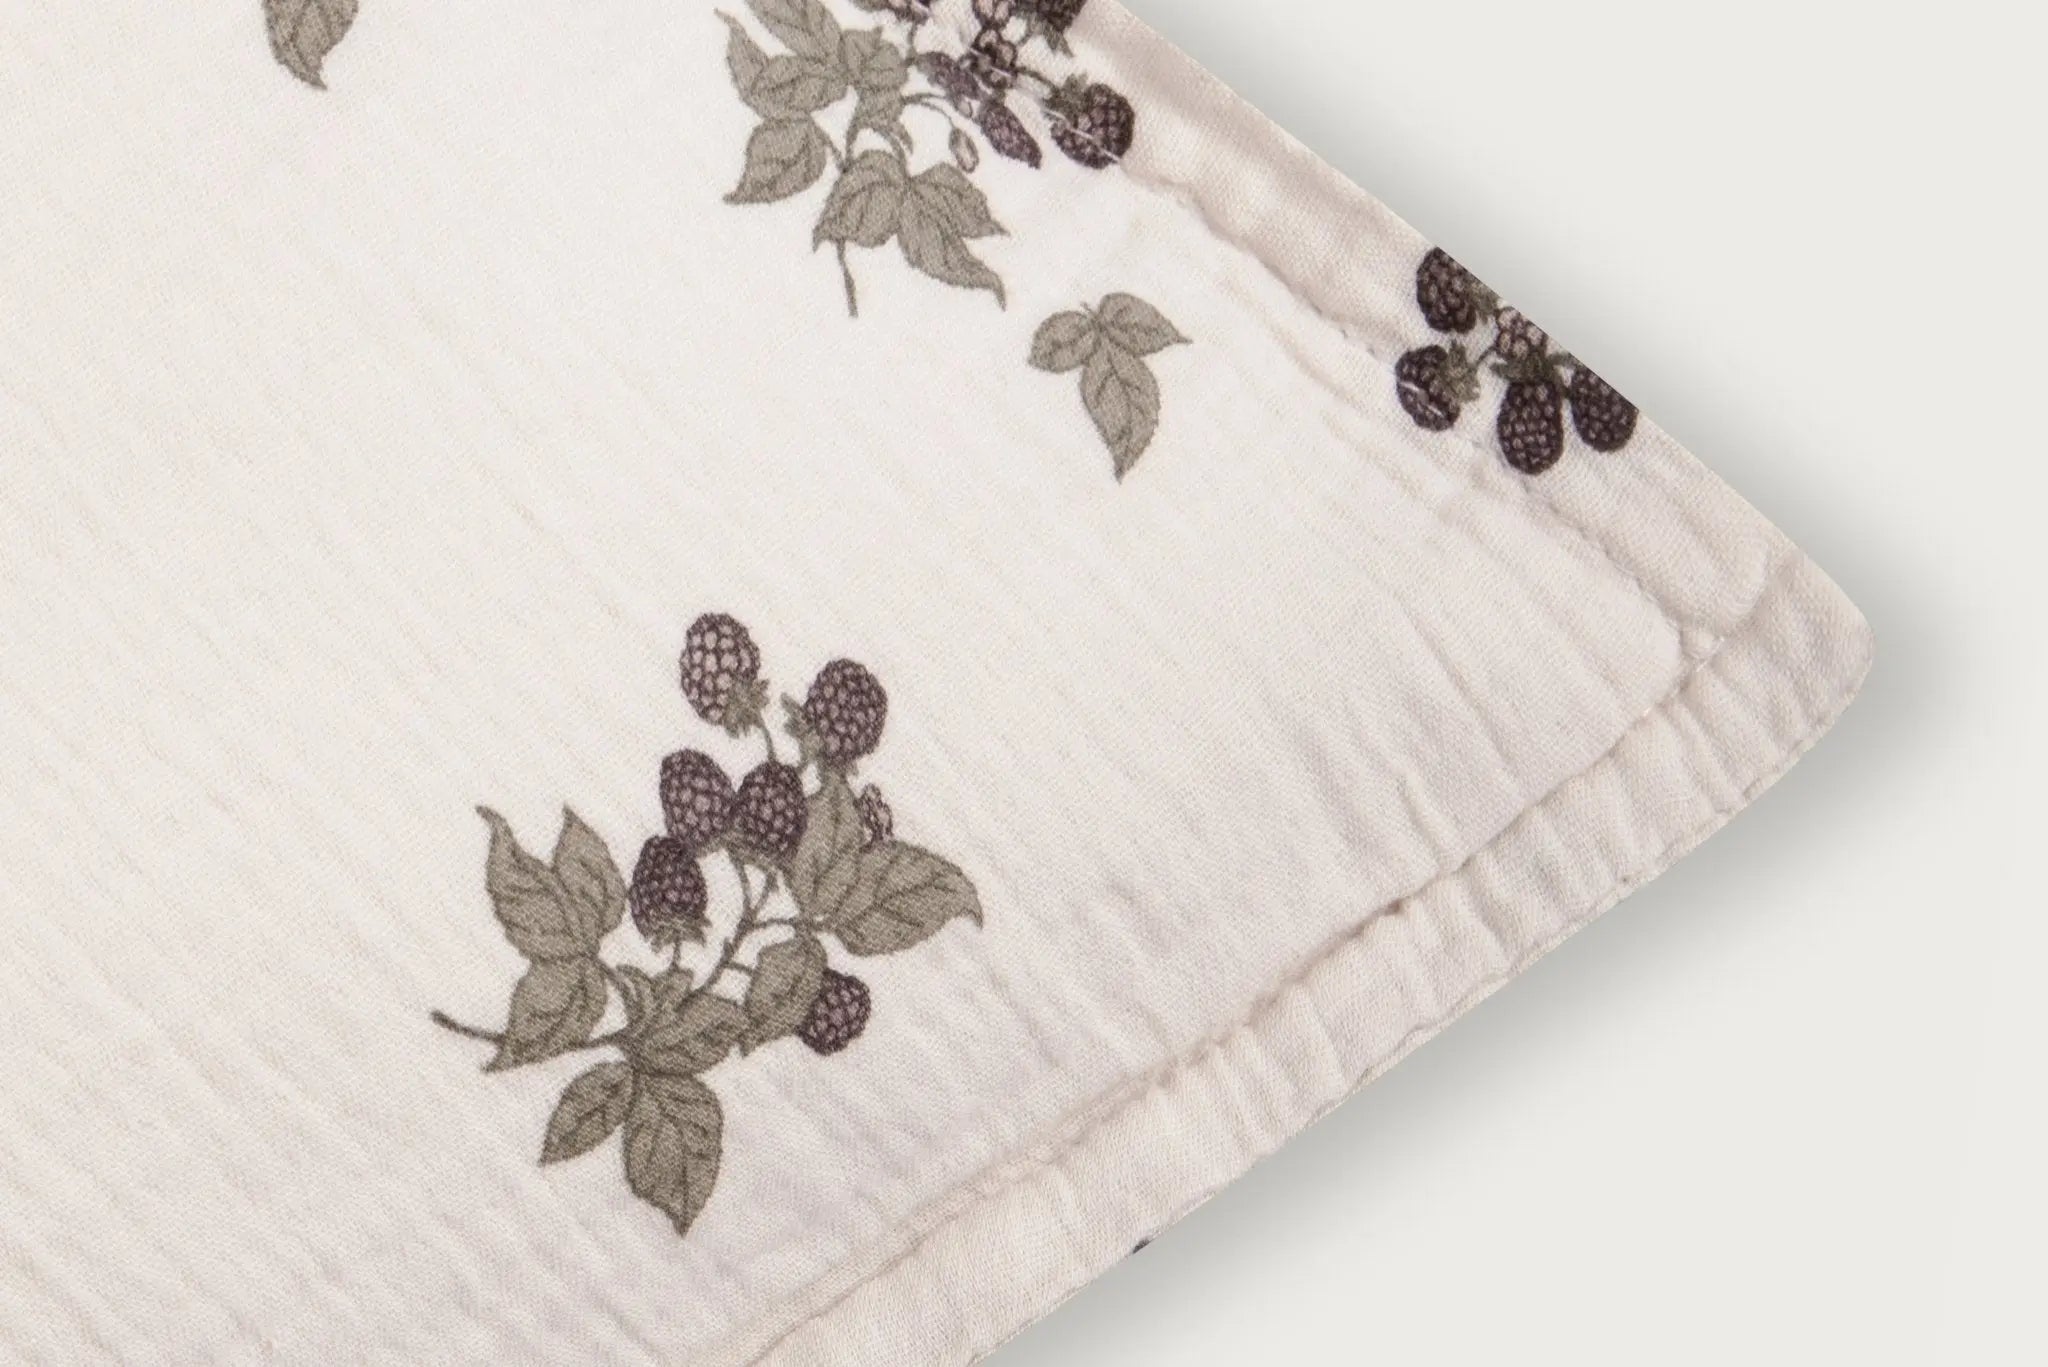 Muslin Pillowcase - Blackberry, Bedding Accessory, Mix and Match Style  Garbo and Friends   